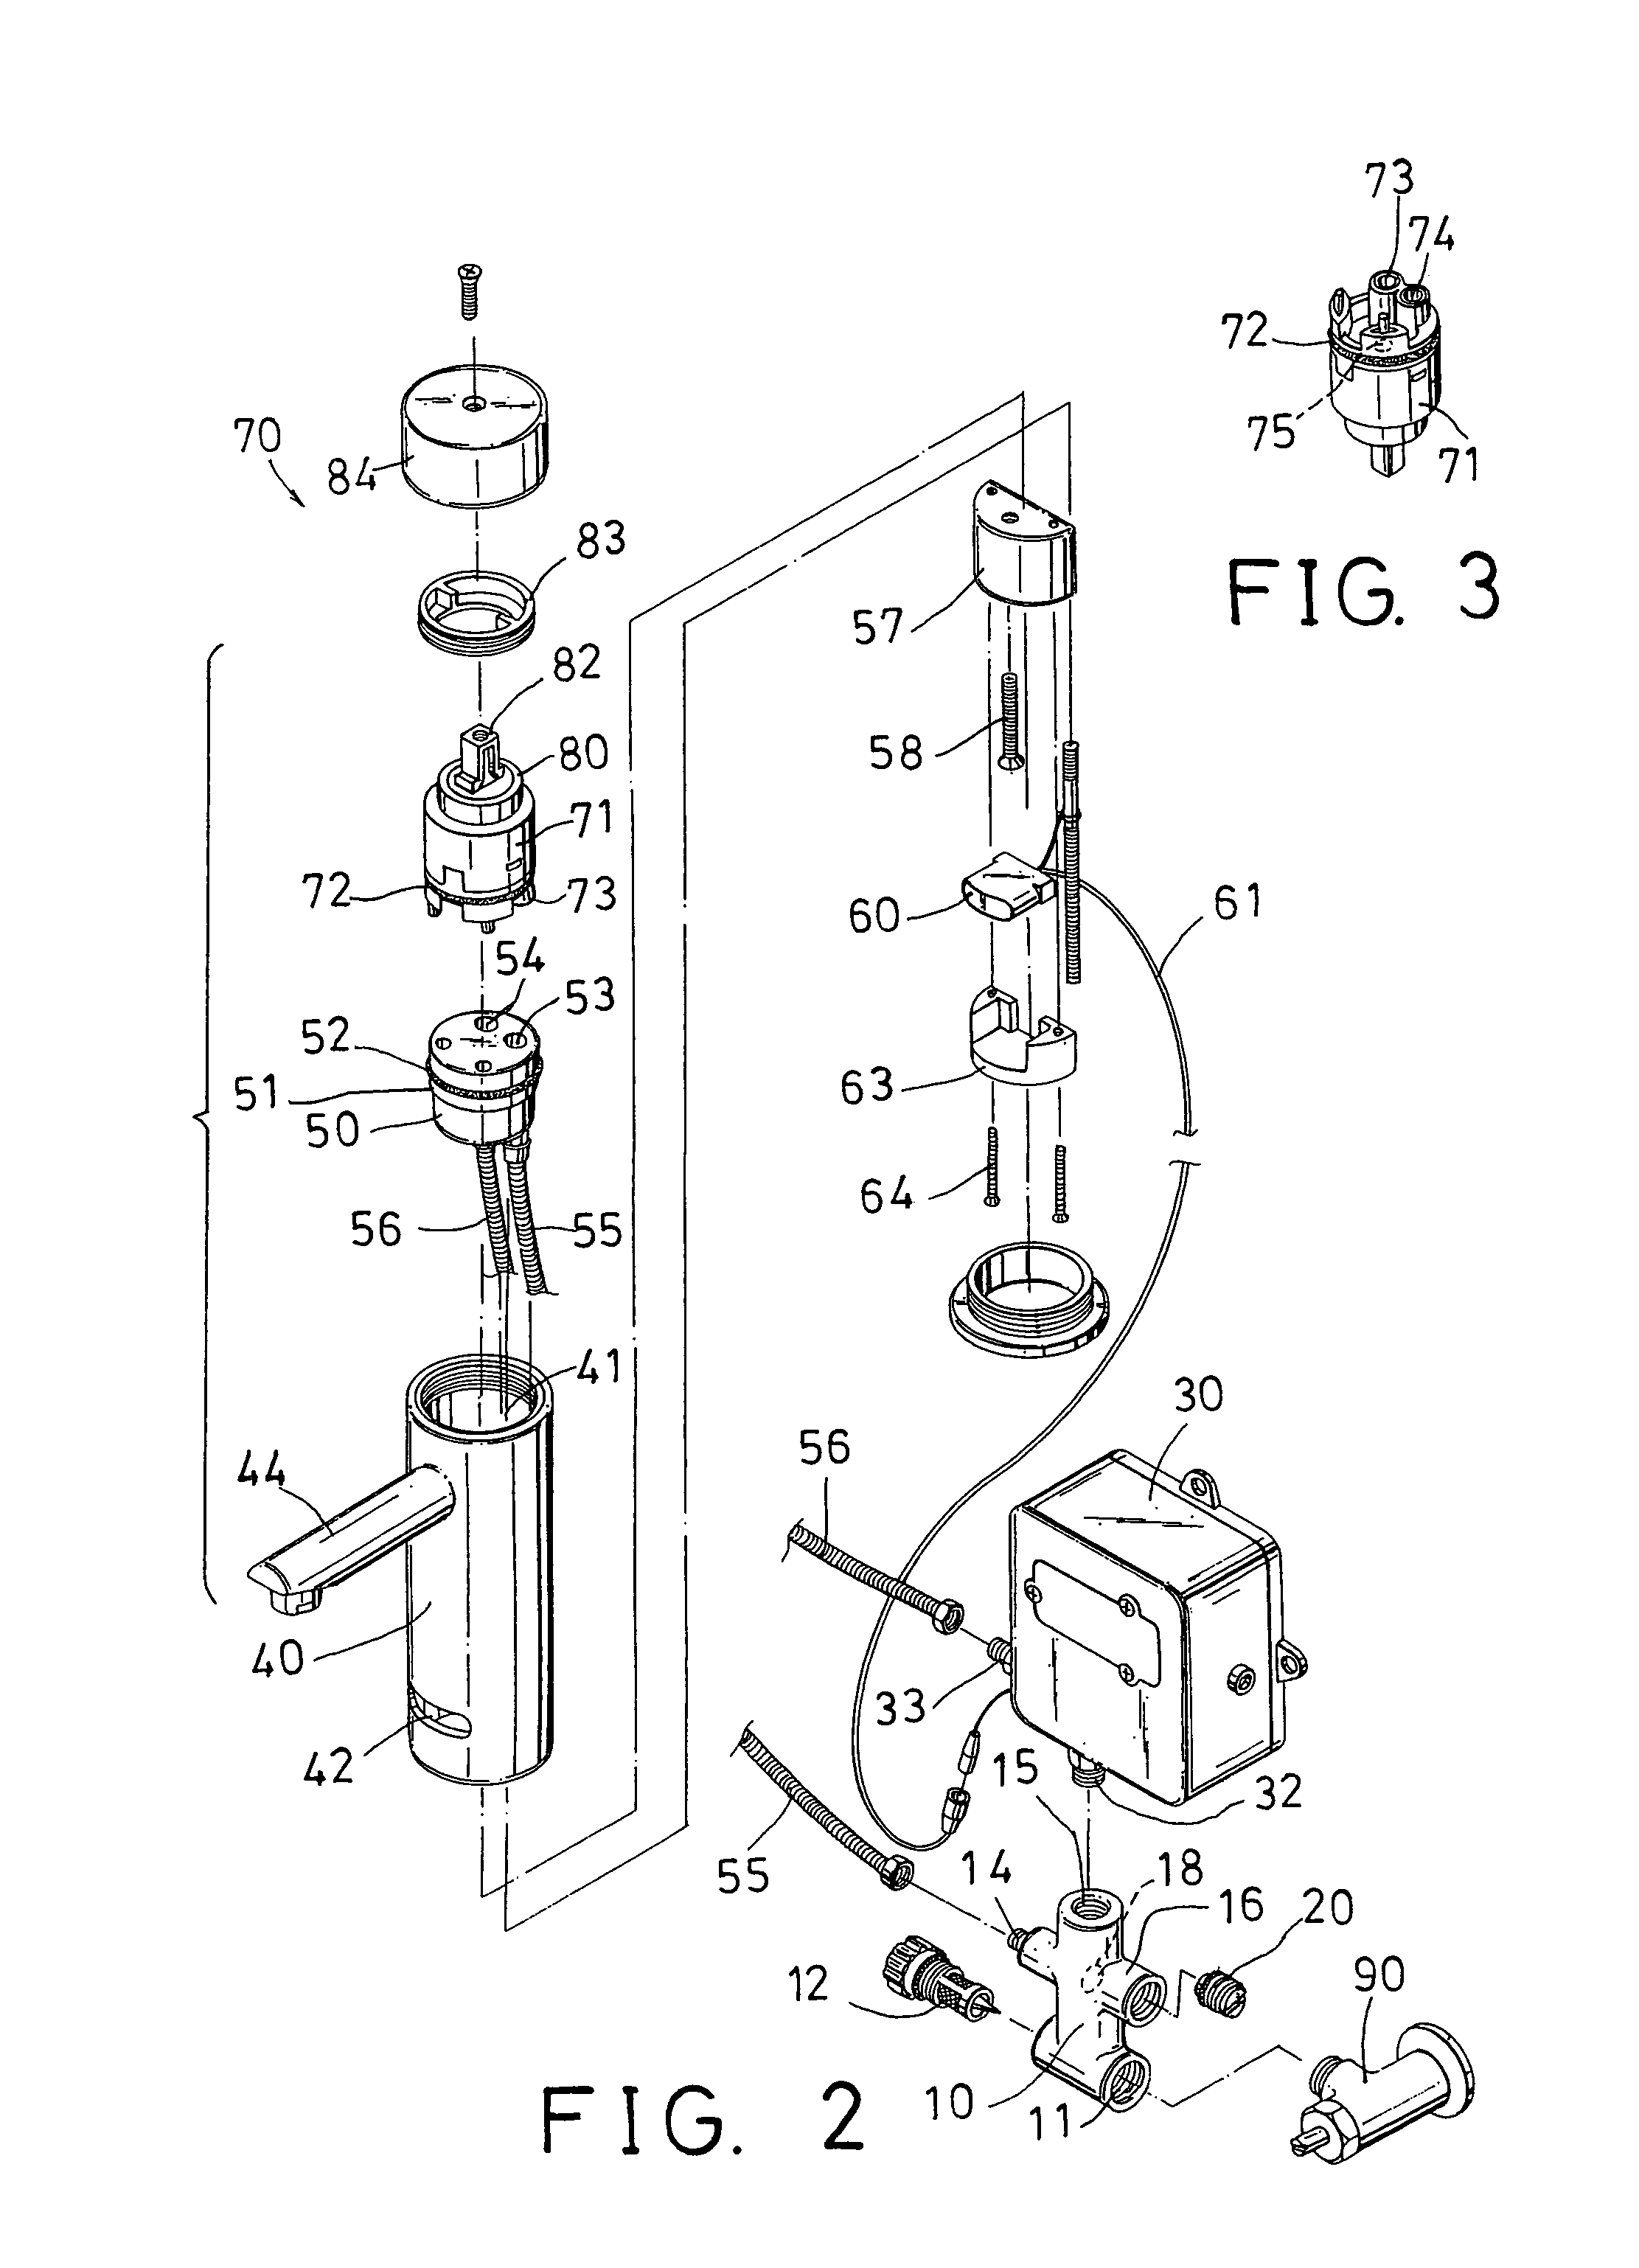 Faucet device operatable either manually or automatically